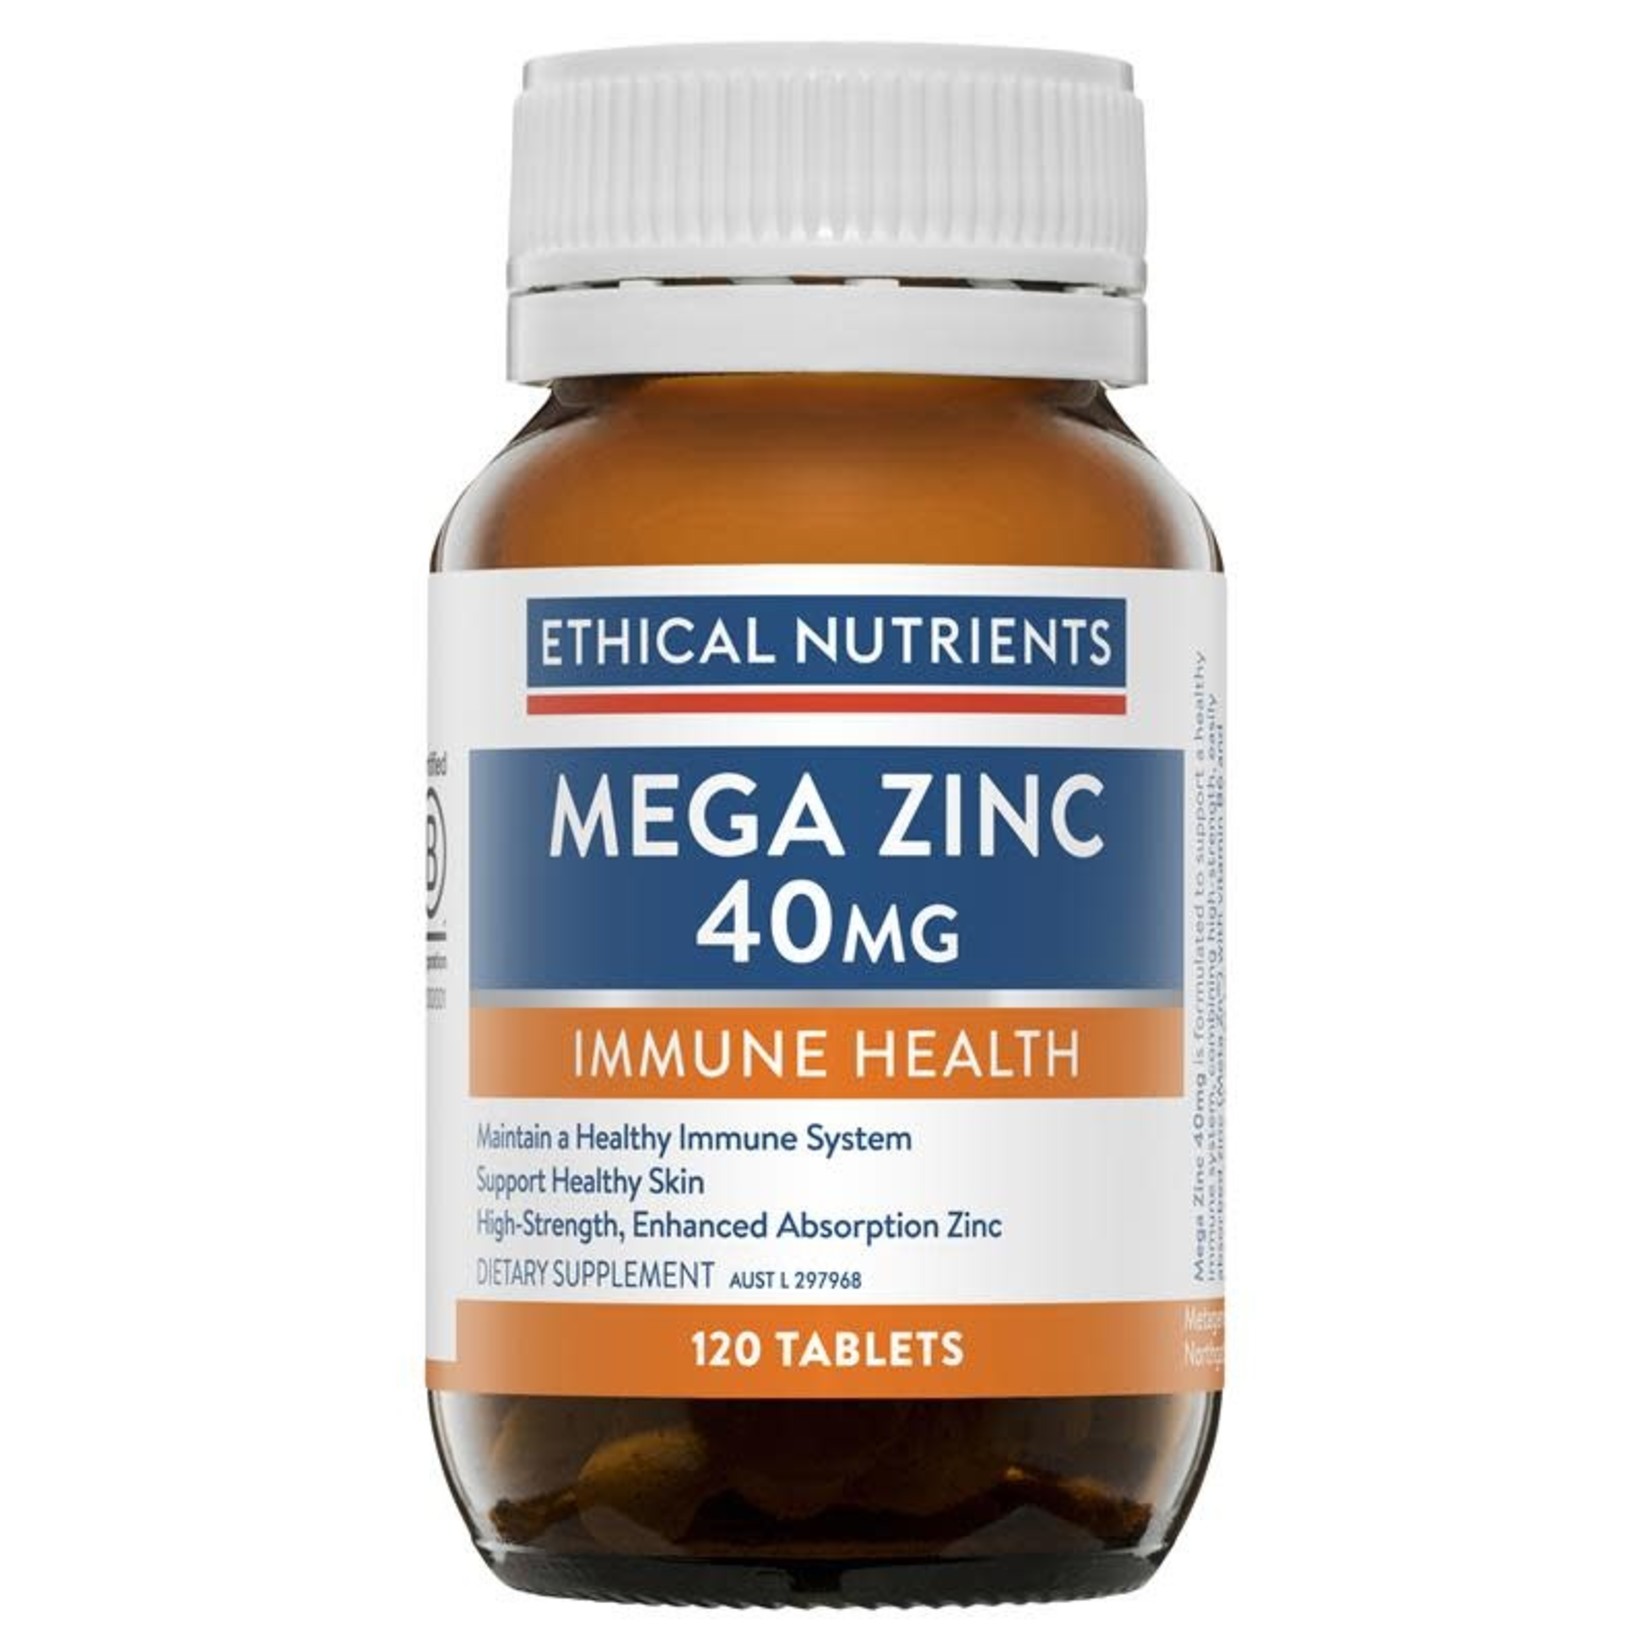 ETHICAL NUTRIENTS Ethical Nutrients Mega Zinc 40mg 120 tabs